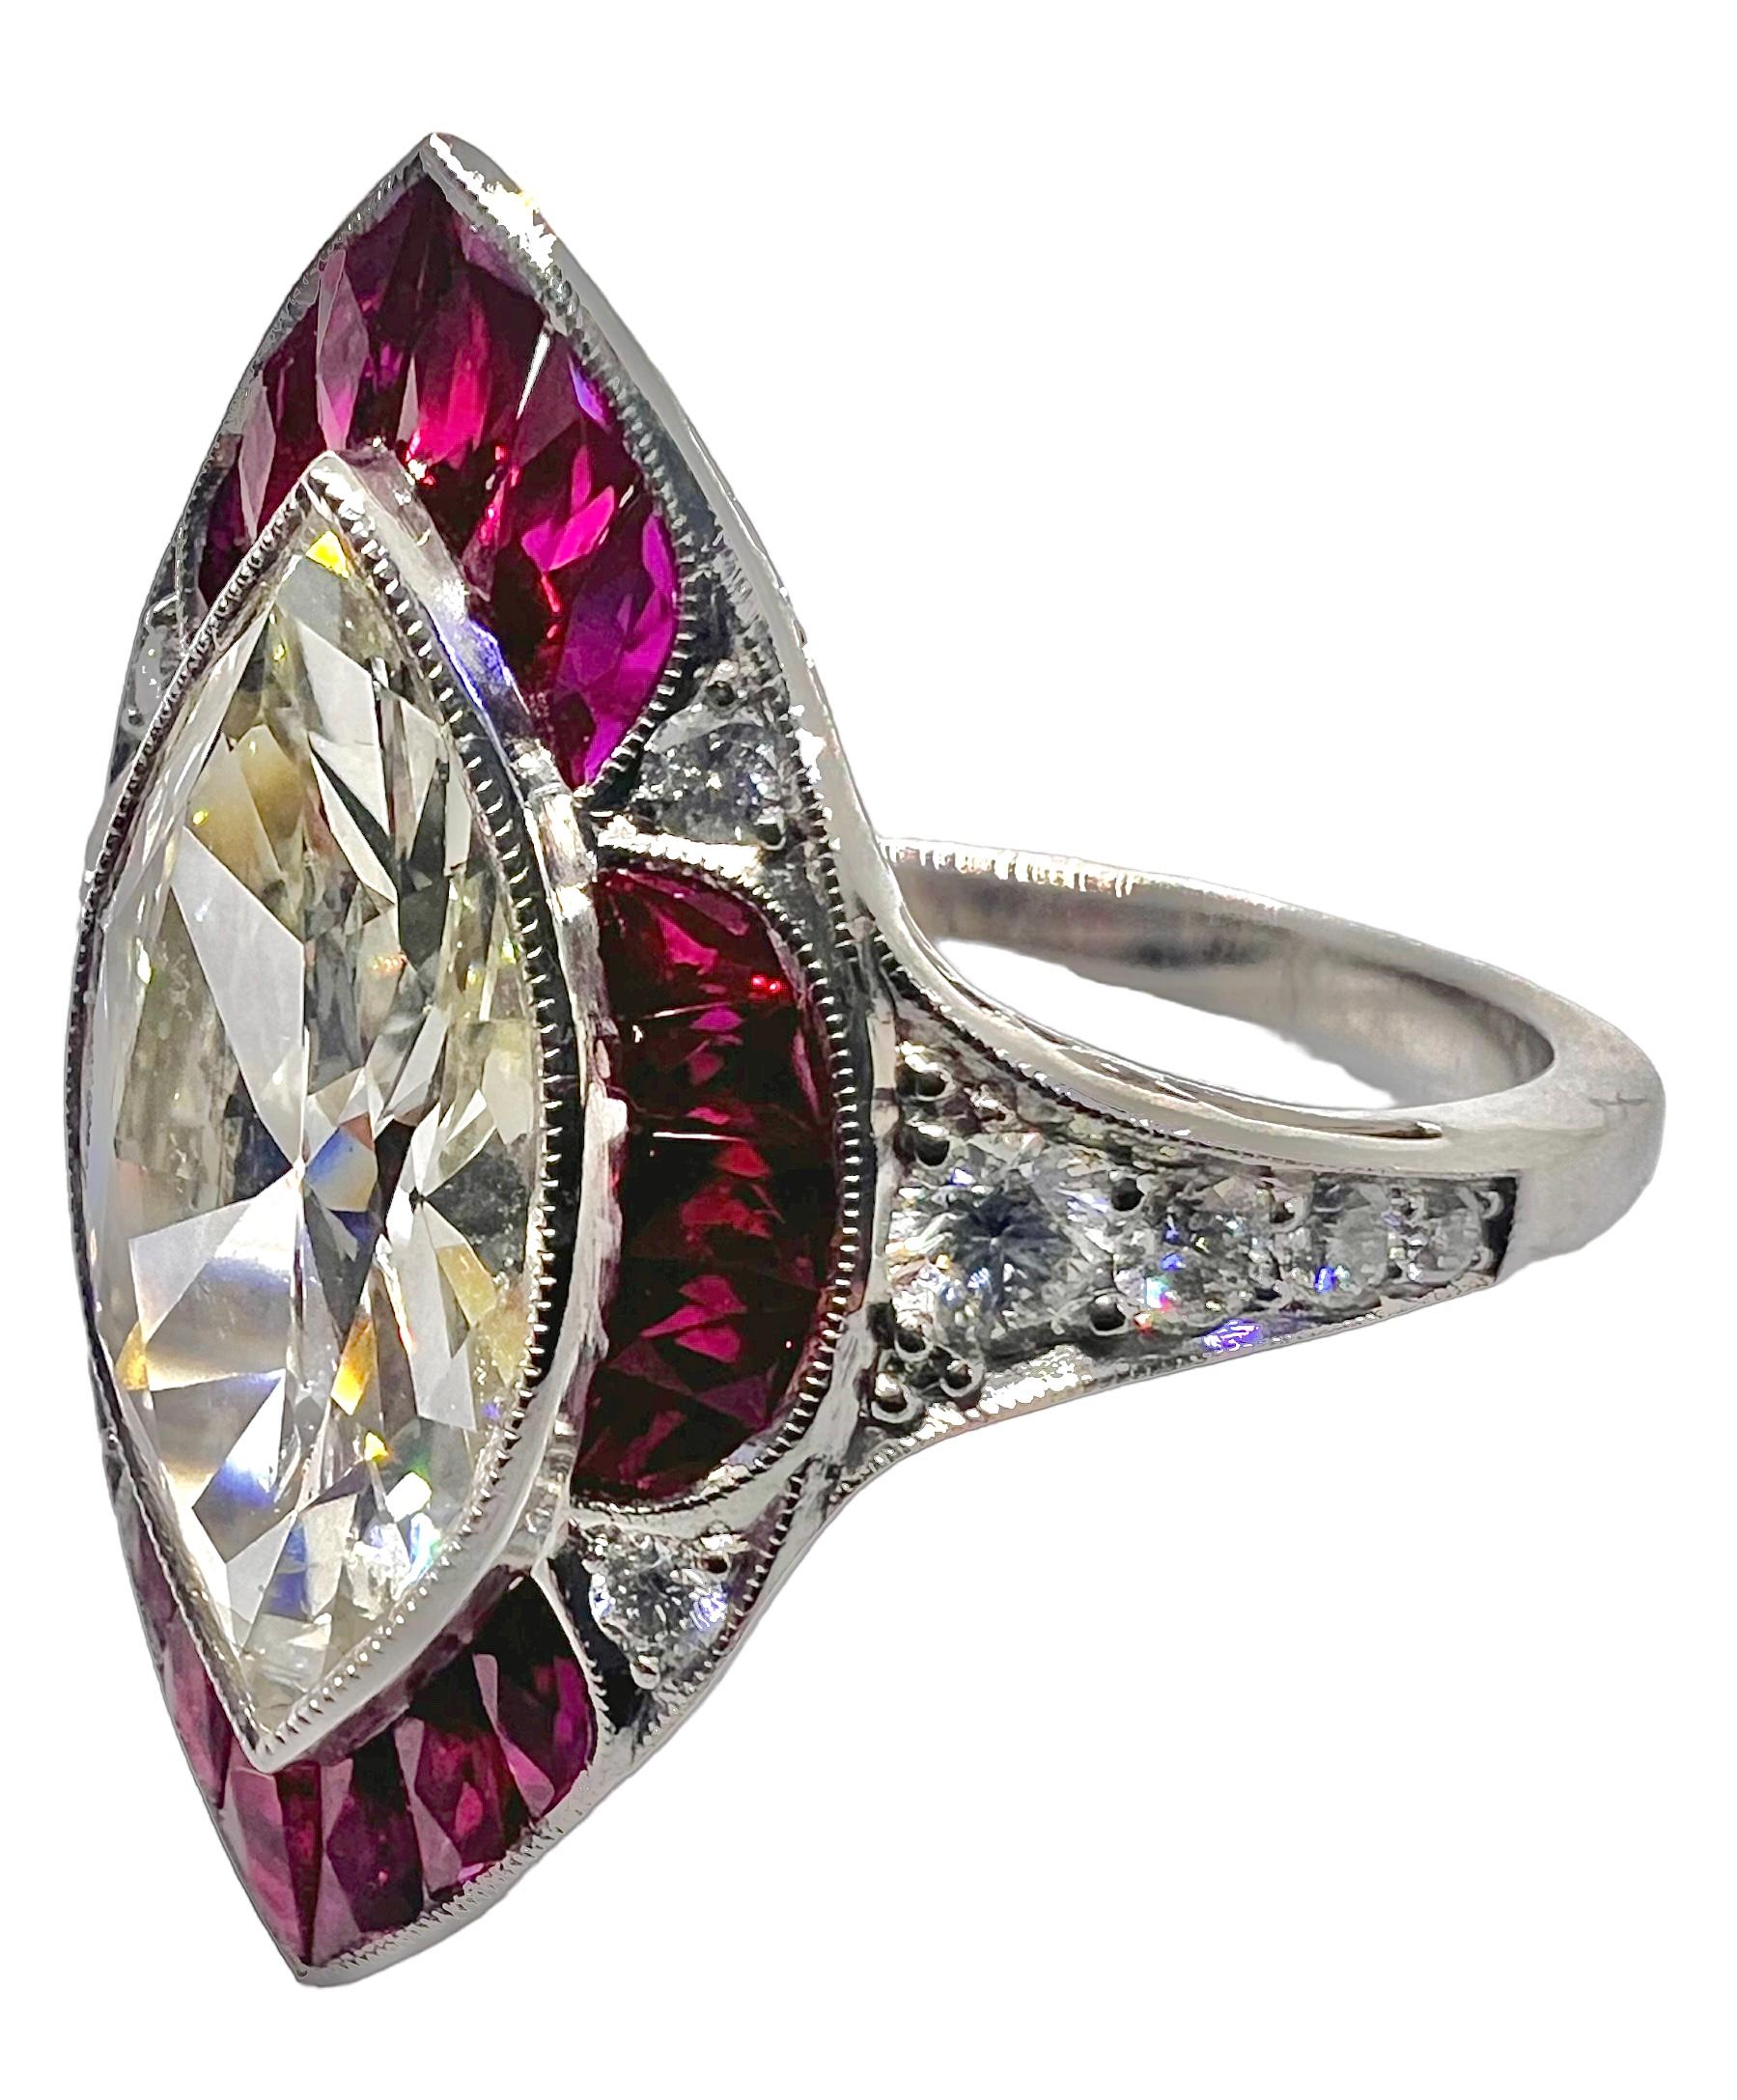 An Art Deco style ring set in platinum with 2.09 carats of marquise diamond, 0.85 carats of rubies and 0.21 carats of diamonds.

Sophia D by Joseph Dardashti LTD has been known worldwide for 35 years and are inspired by classic Art Deco design that